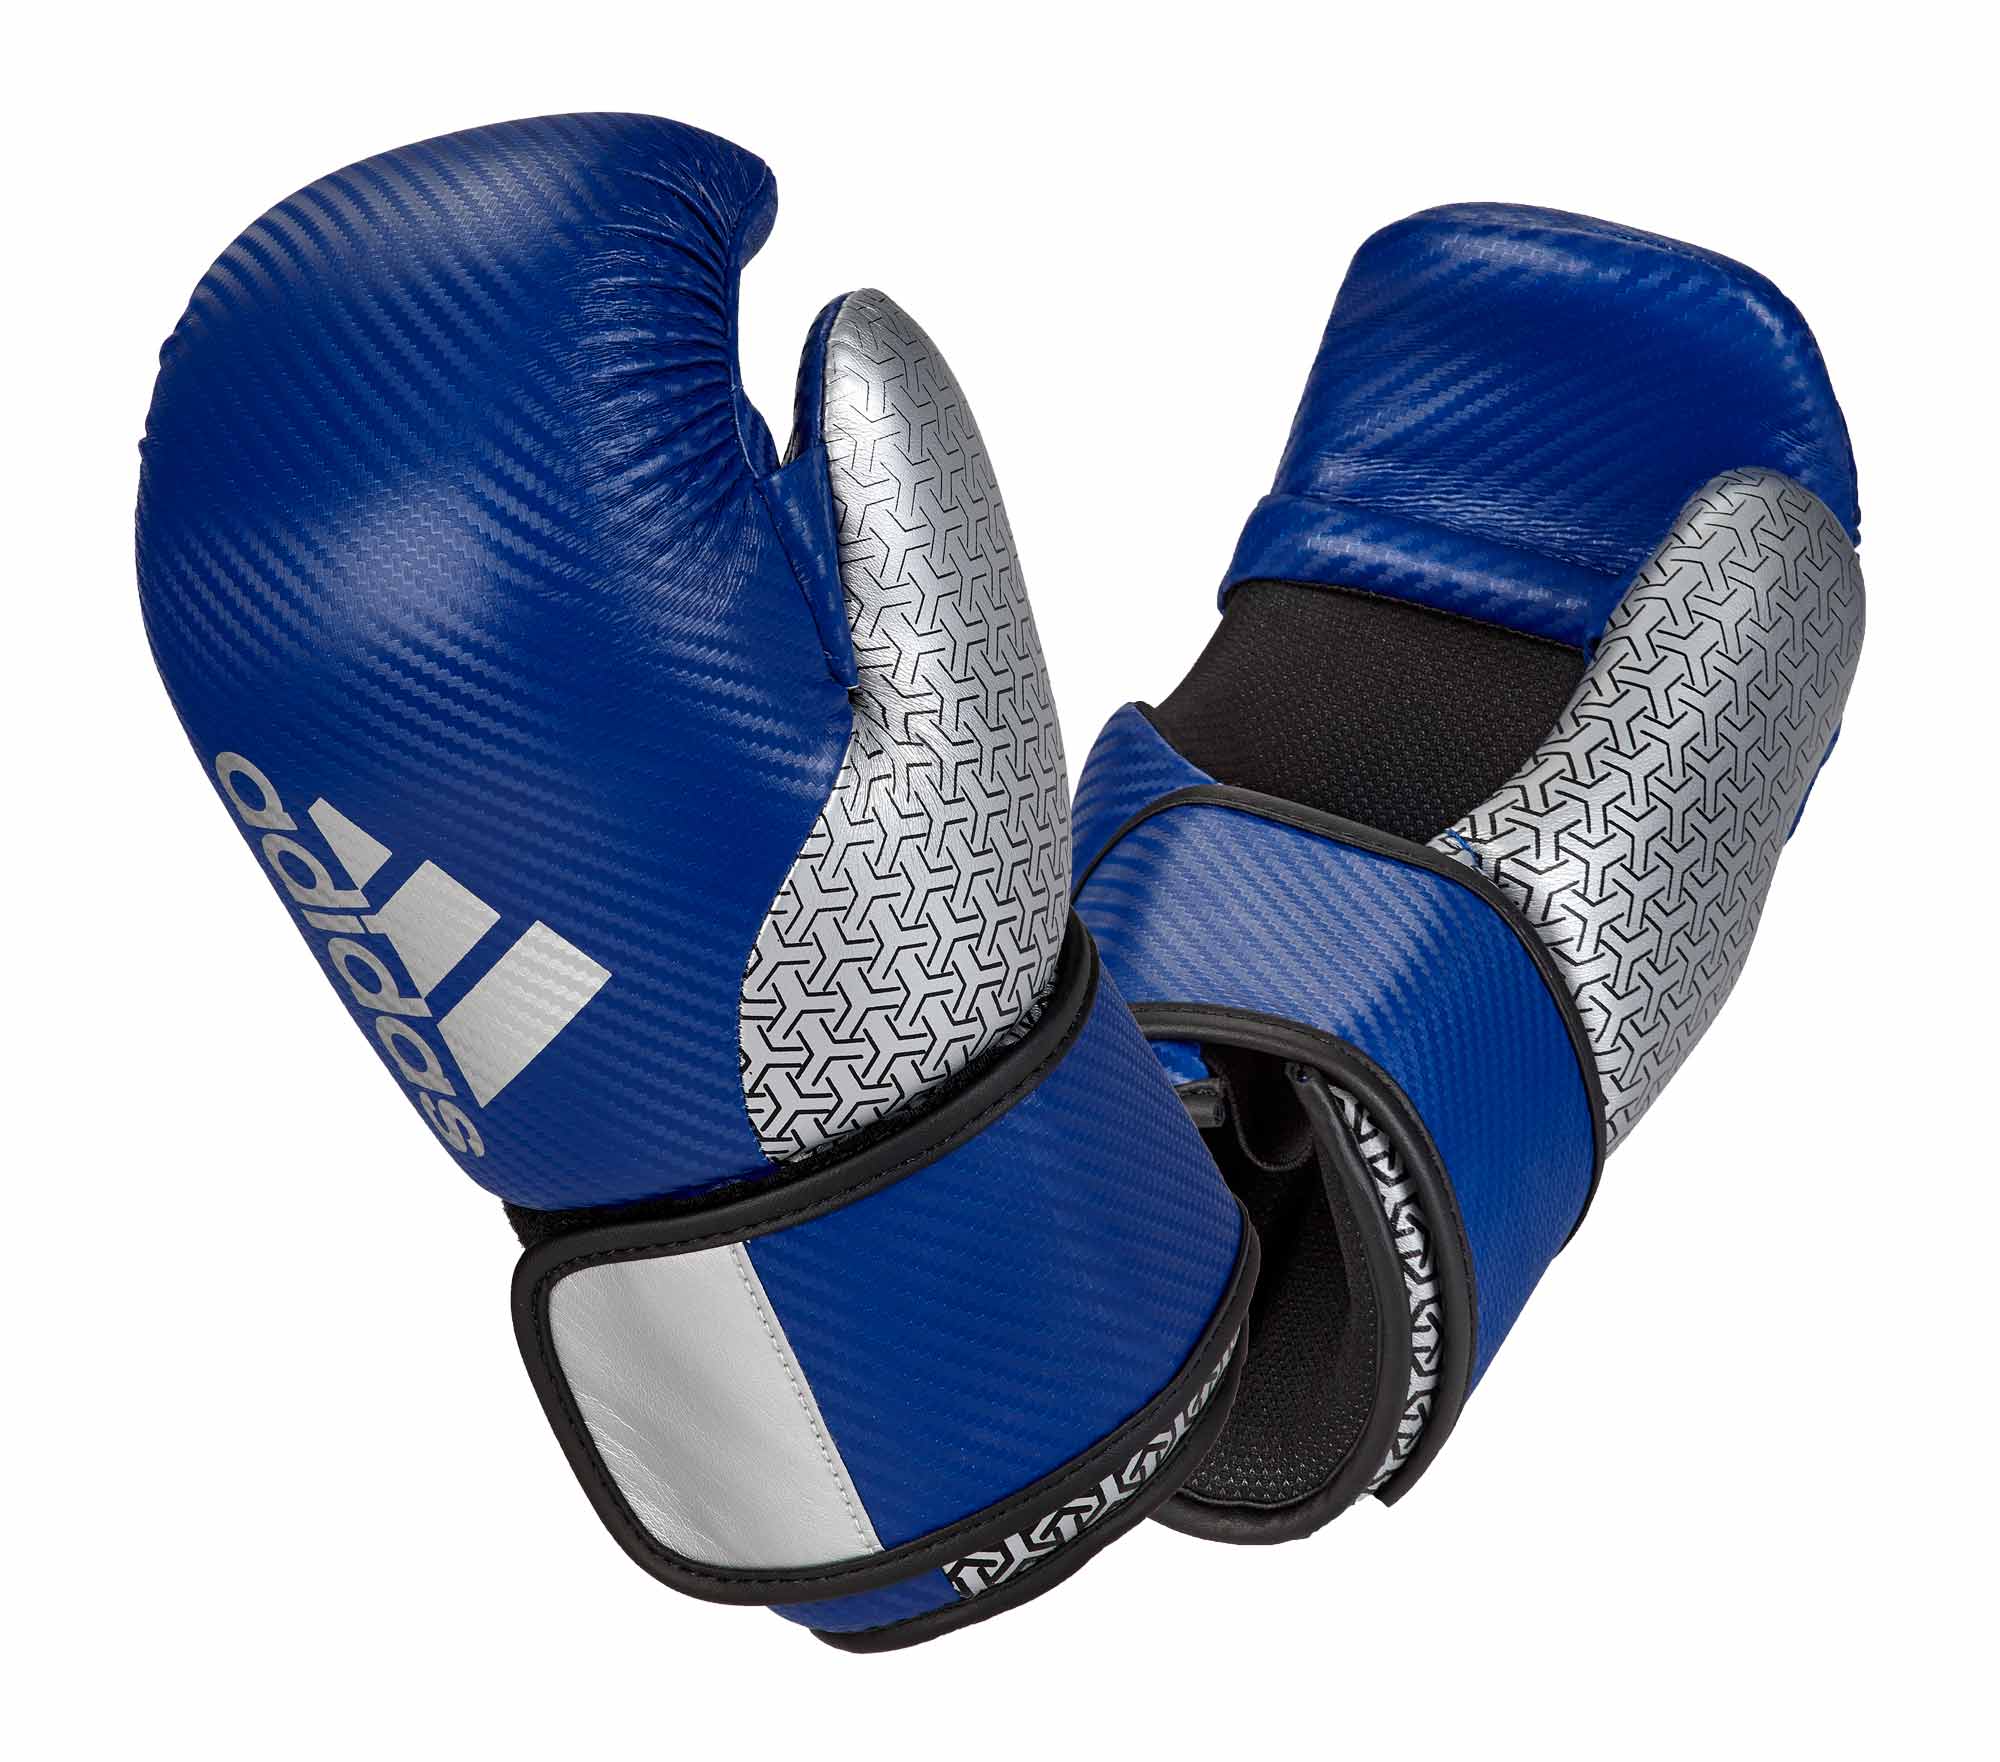 Adidas Pro Point Fighter Handschuhe Blue/Siver